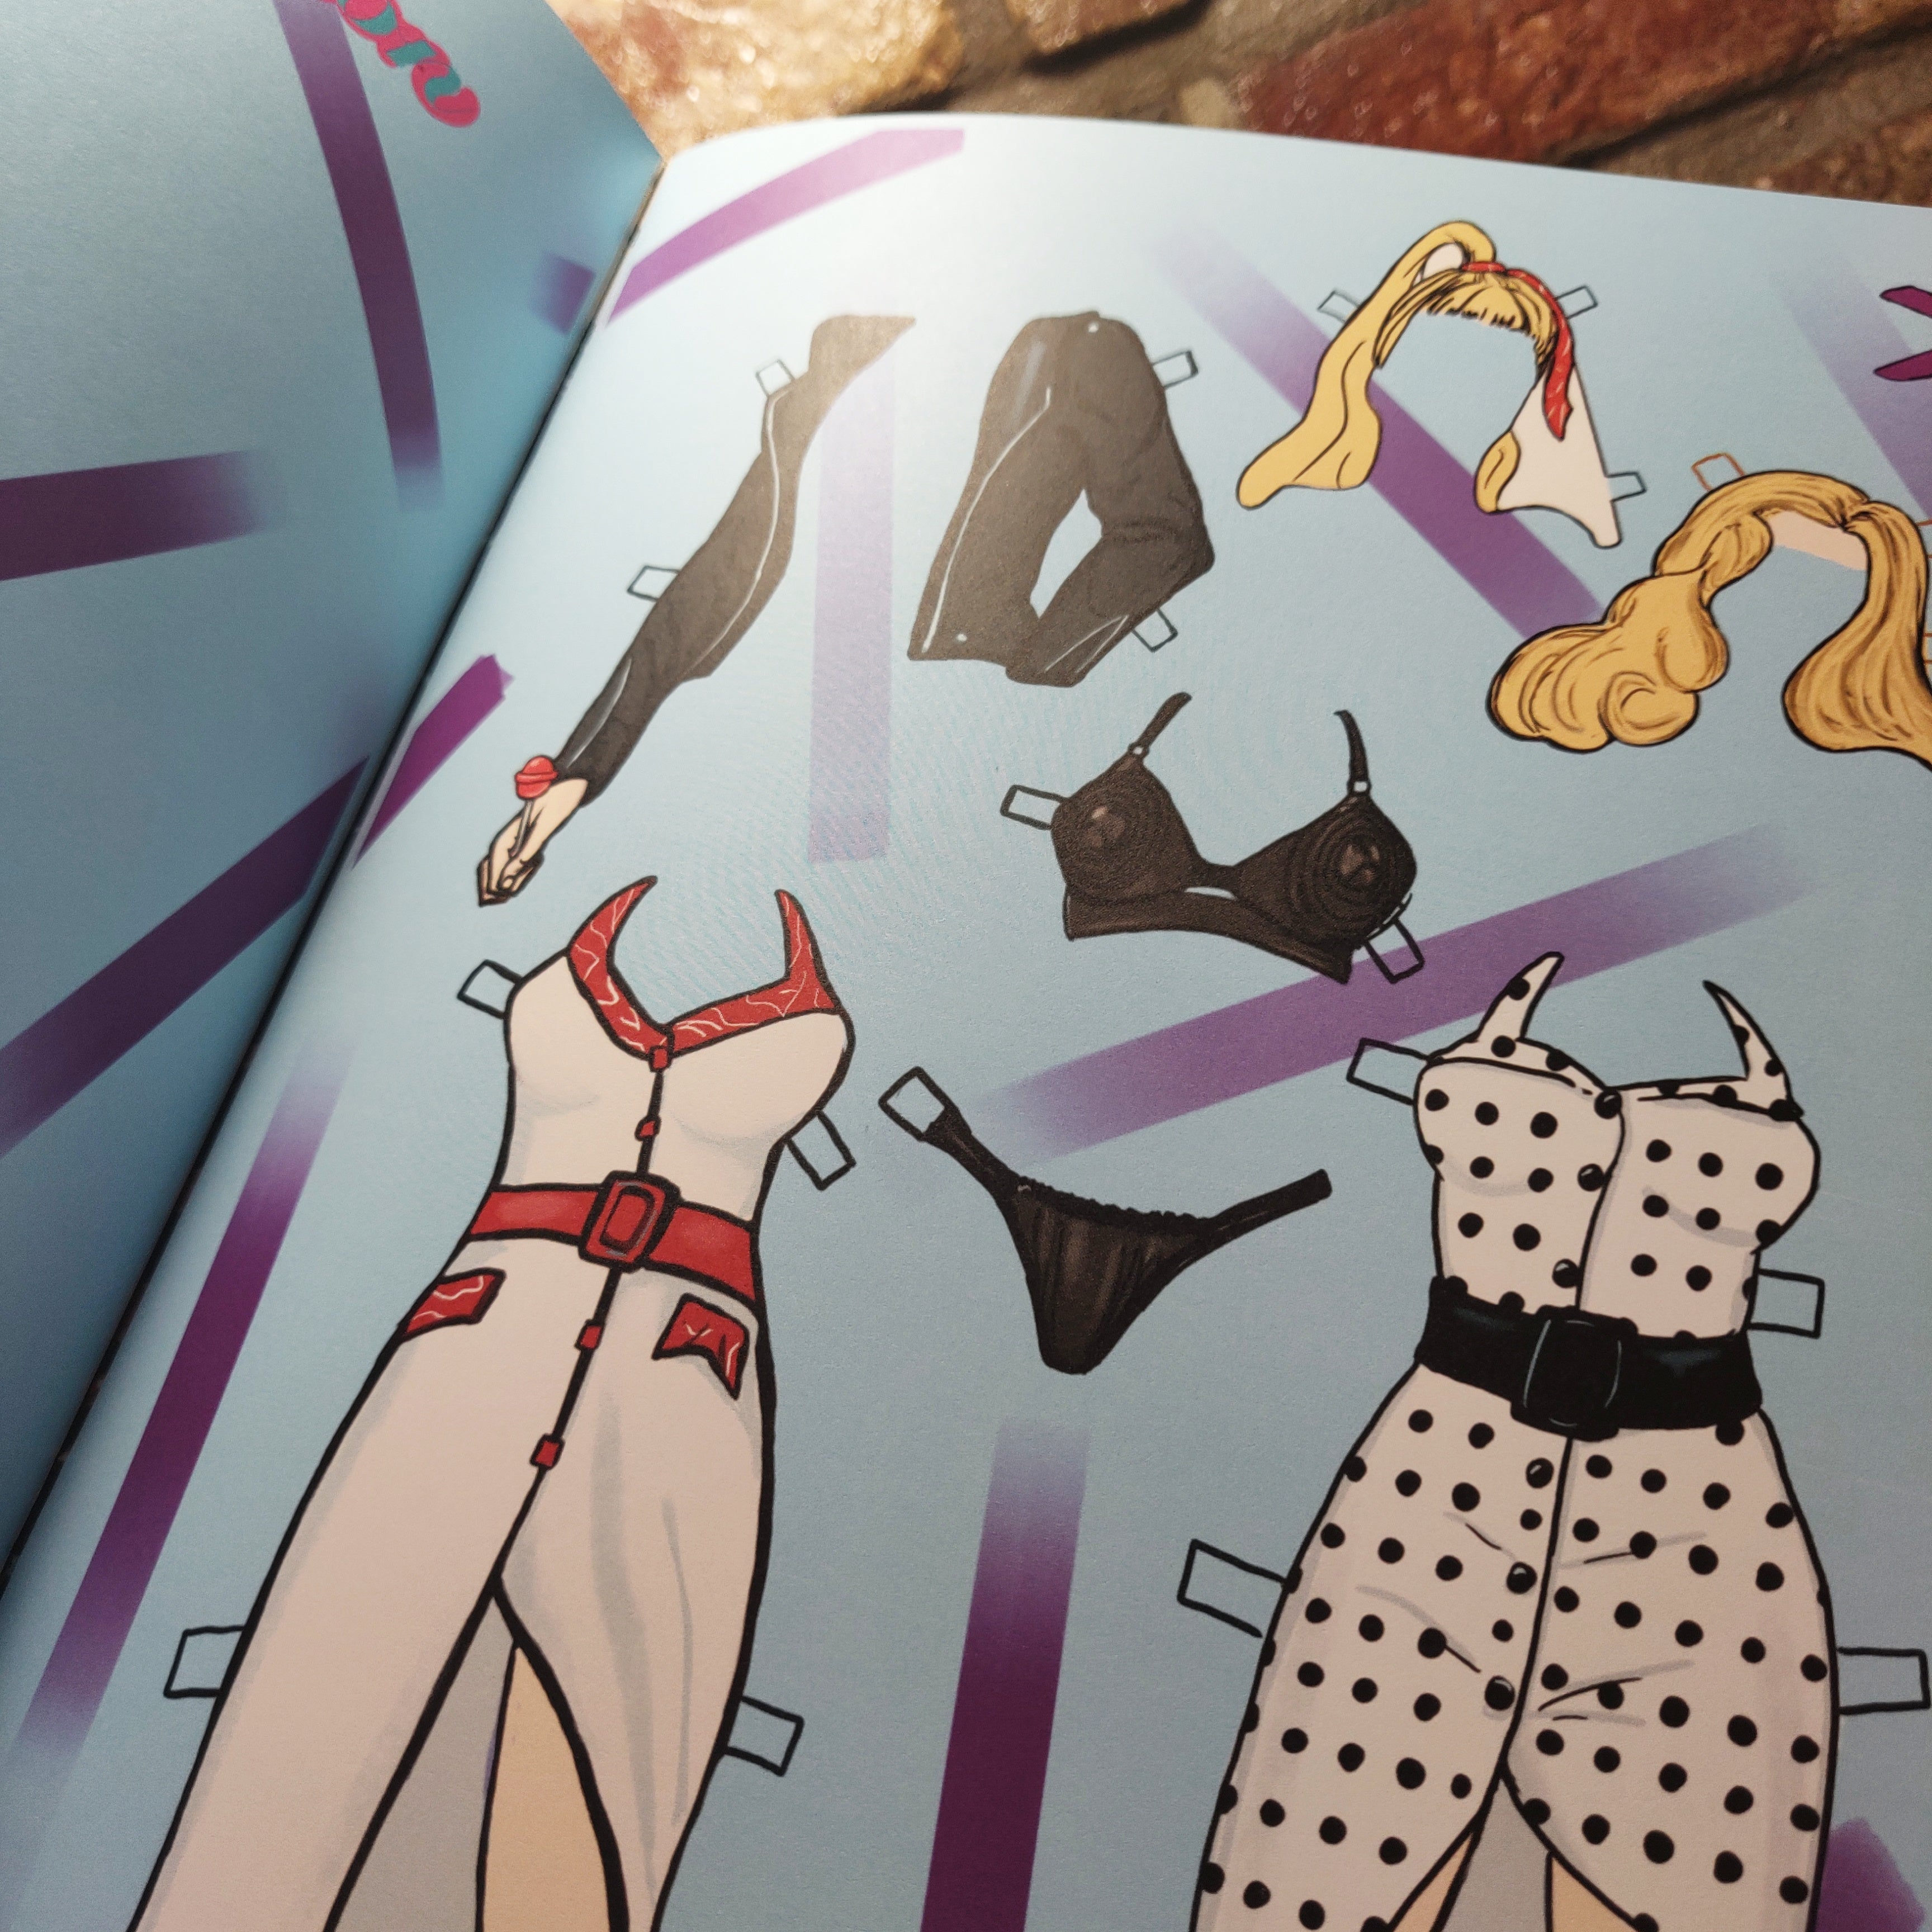 Traci Lords is Wanda Limited Edition Collector's Paper Doll Book!